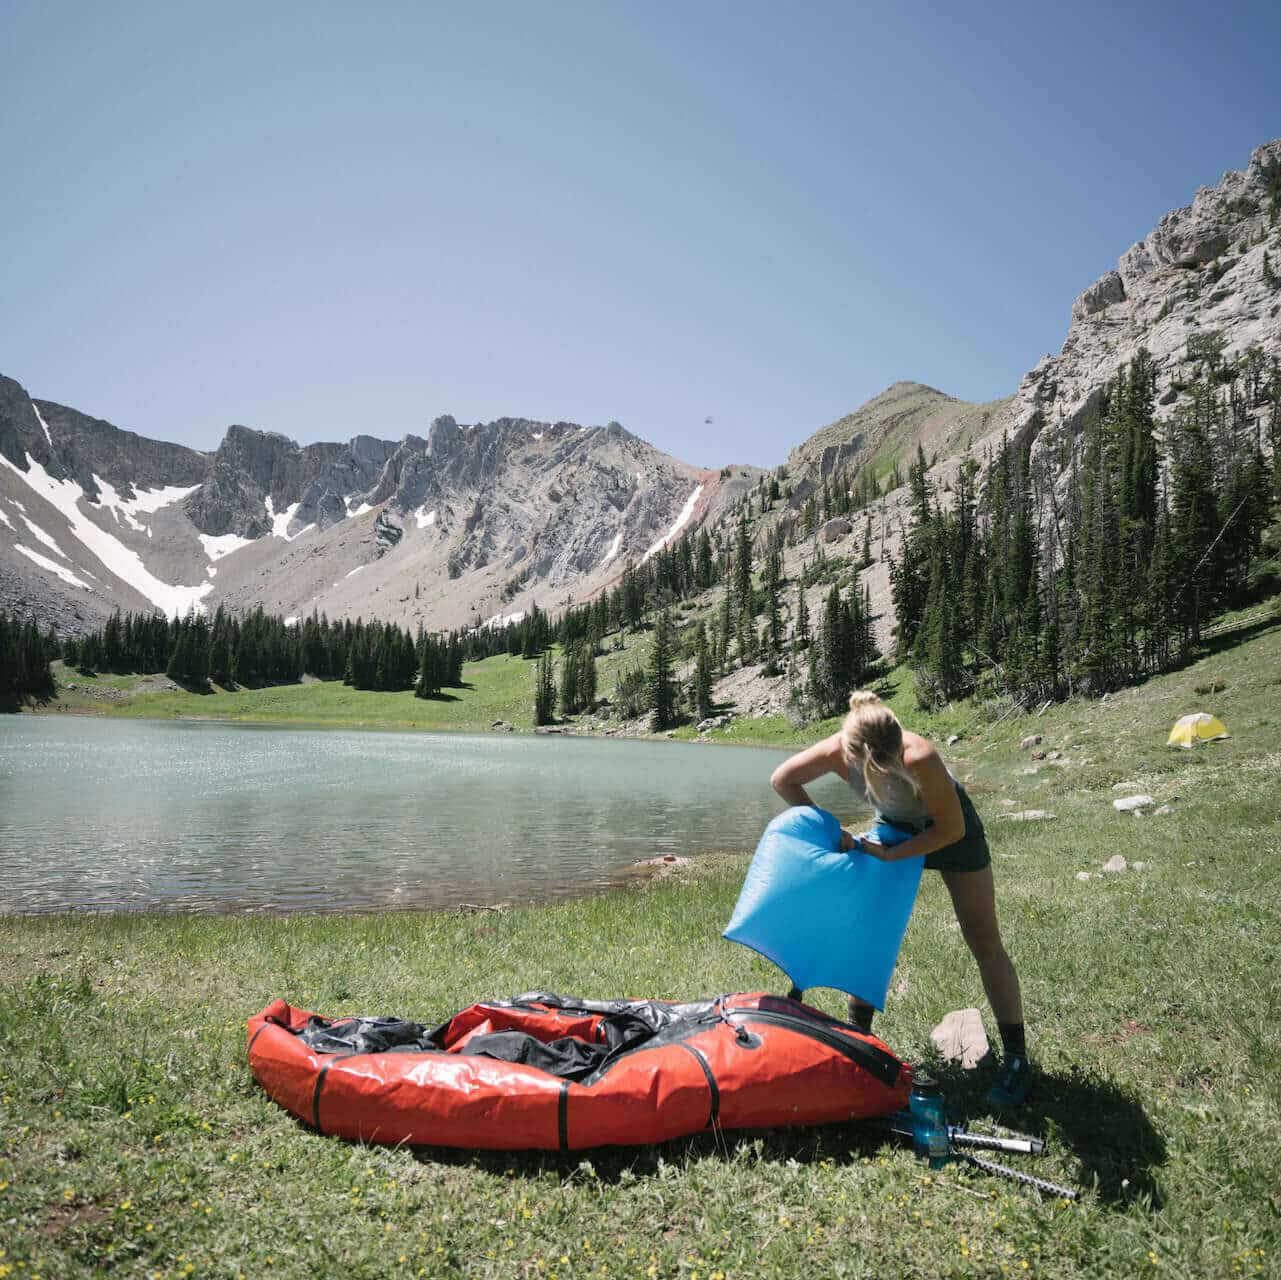 A Cairn Project ambassador pumps up a red inflatable kayak with an alpine lake and mountain peak behind her